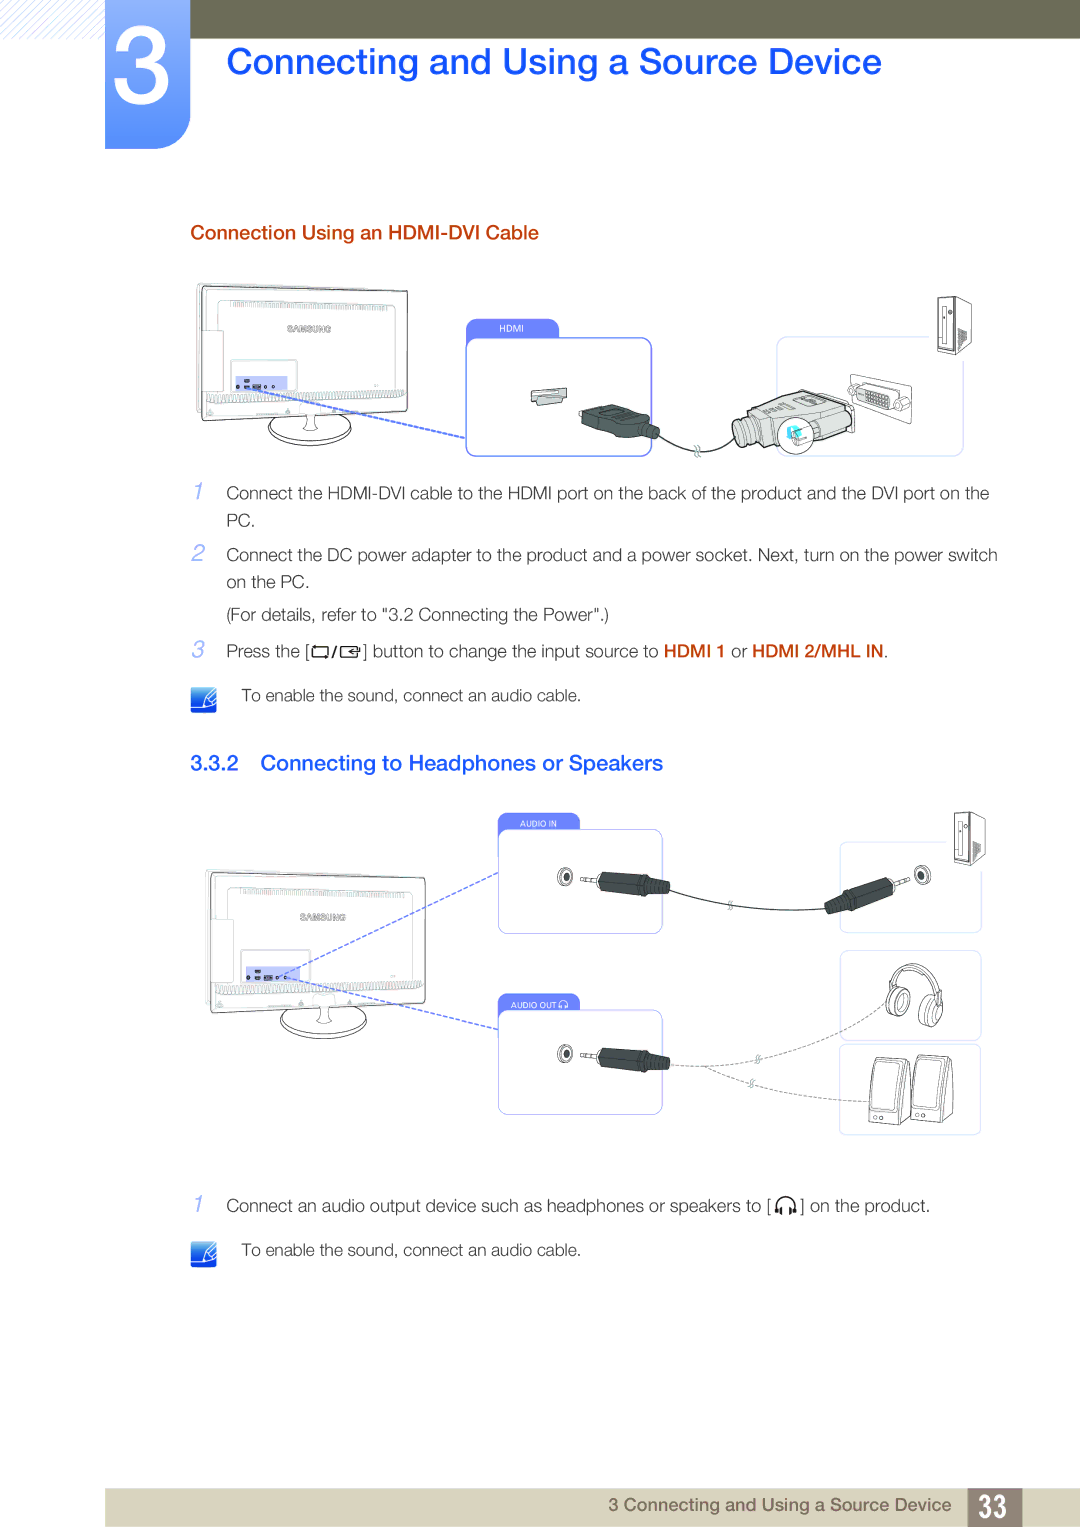 Samsung S27B350H, S27B550V, S23B550V user manual Connecting to Headphones or Speakers, Connection Using an HDMI-DVI Cable 